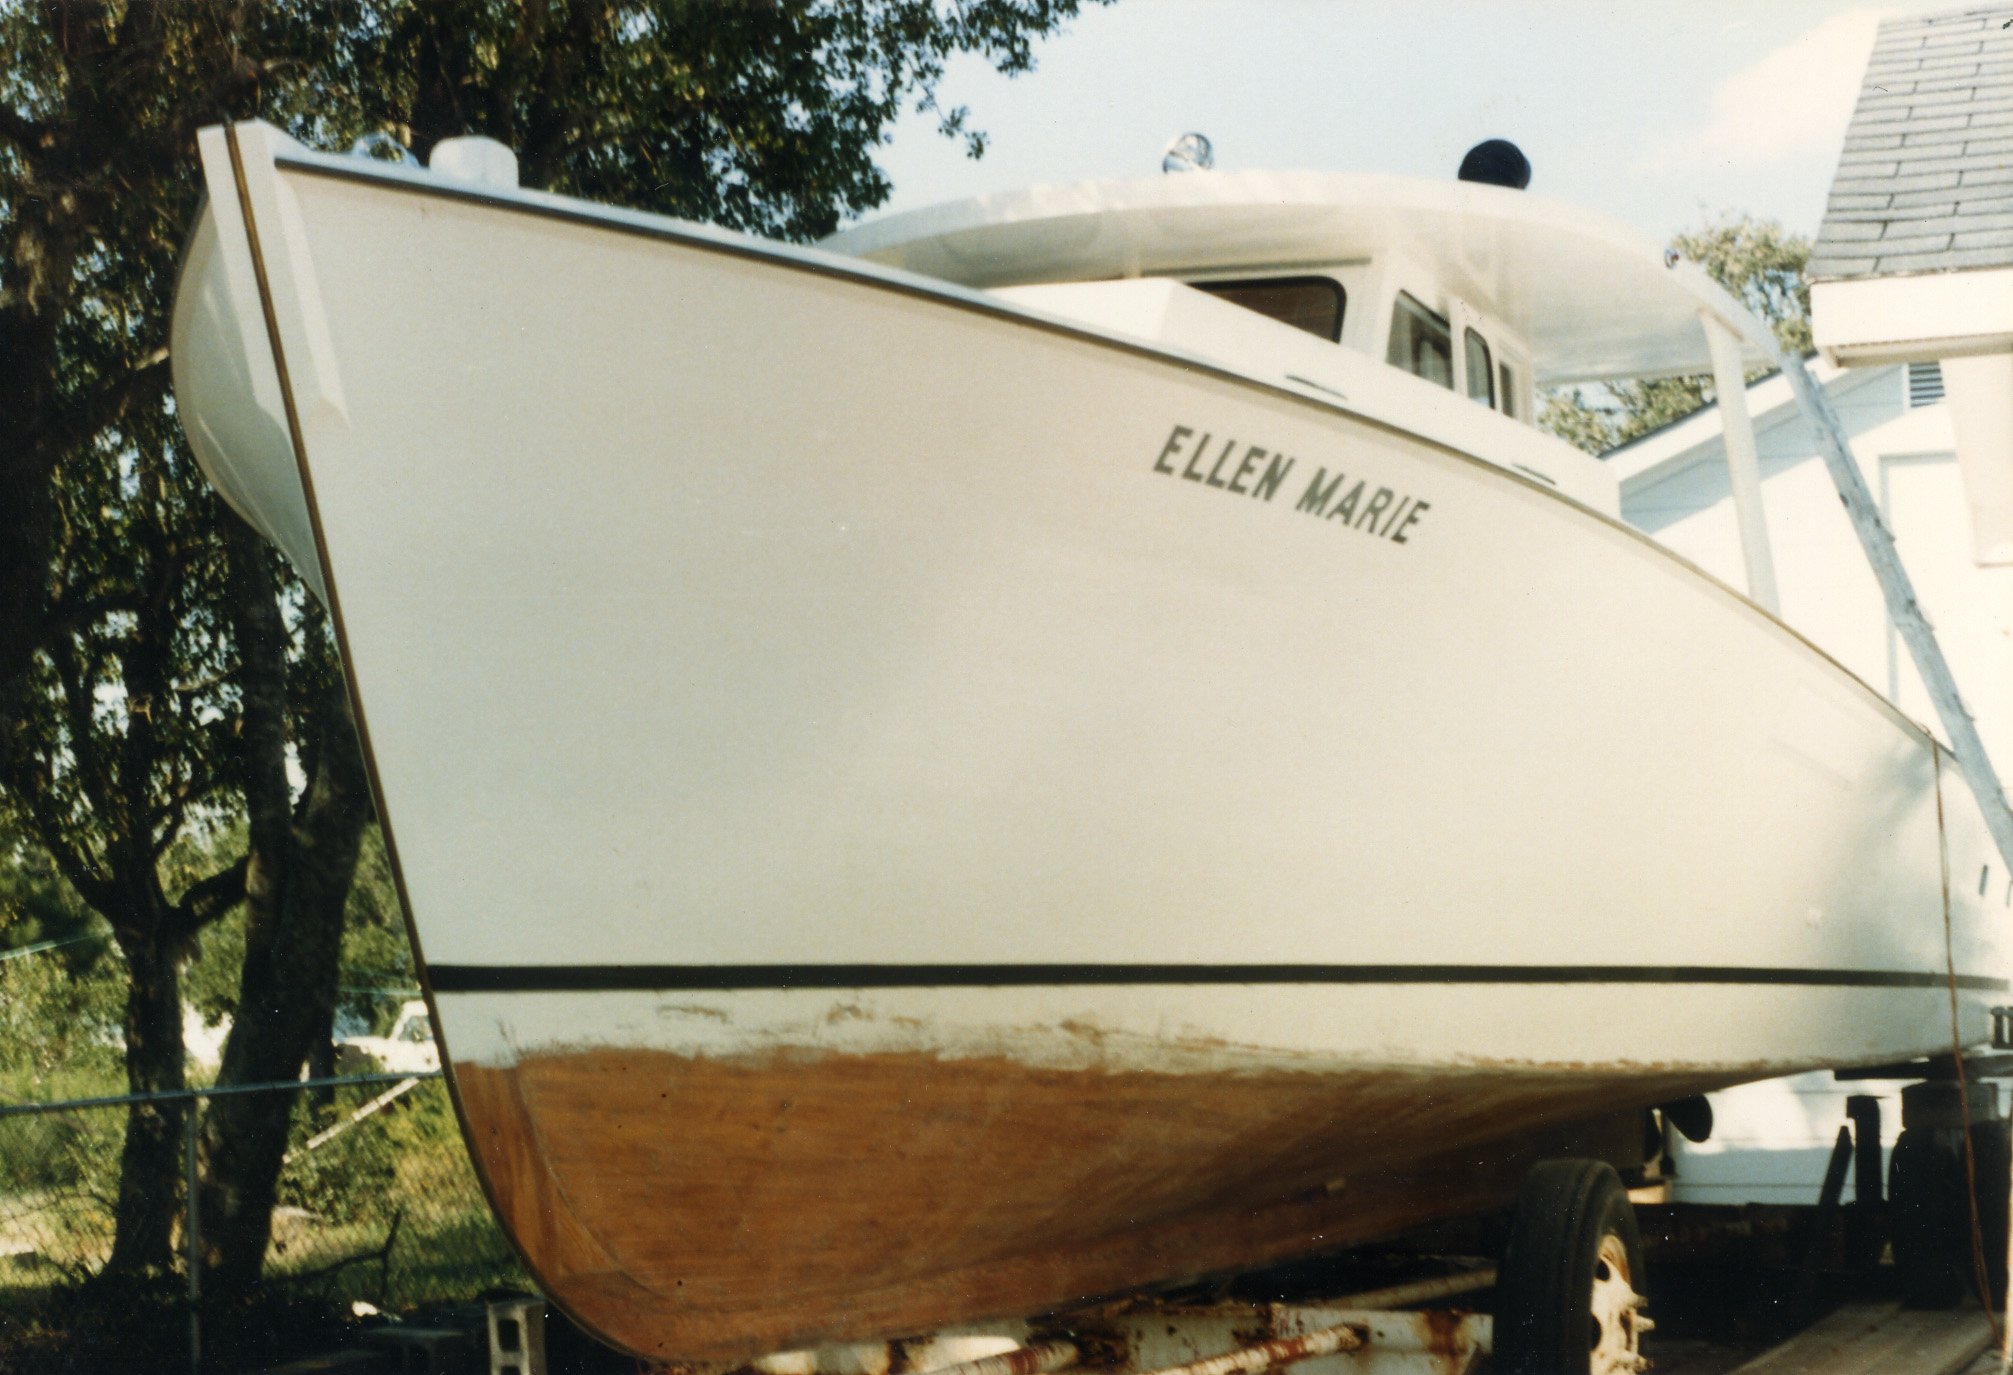 The F/V Ellen Marie “painted-up” and ready to go.